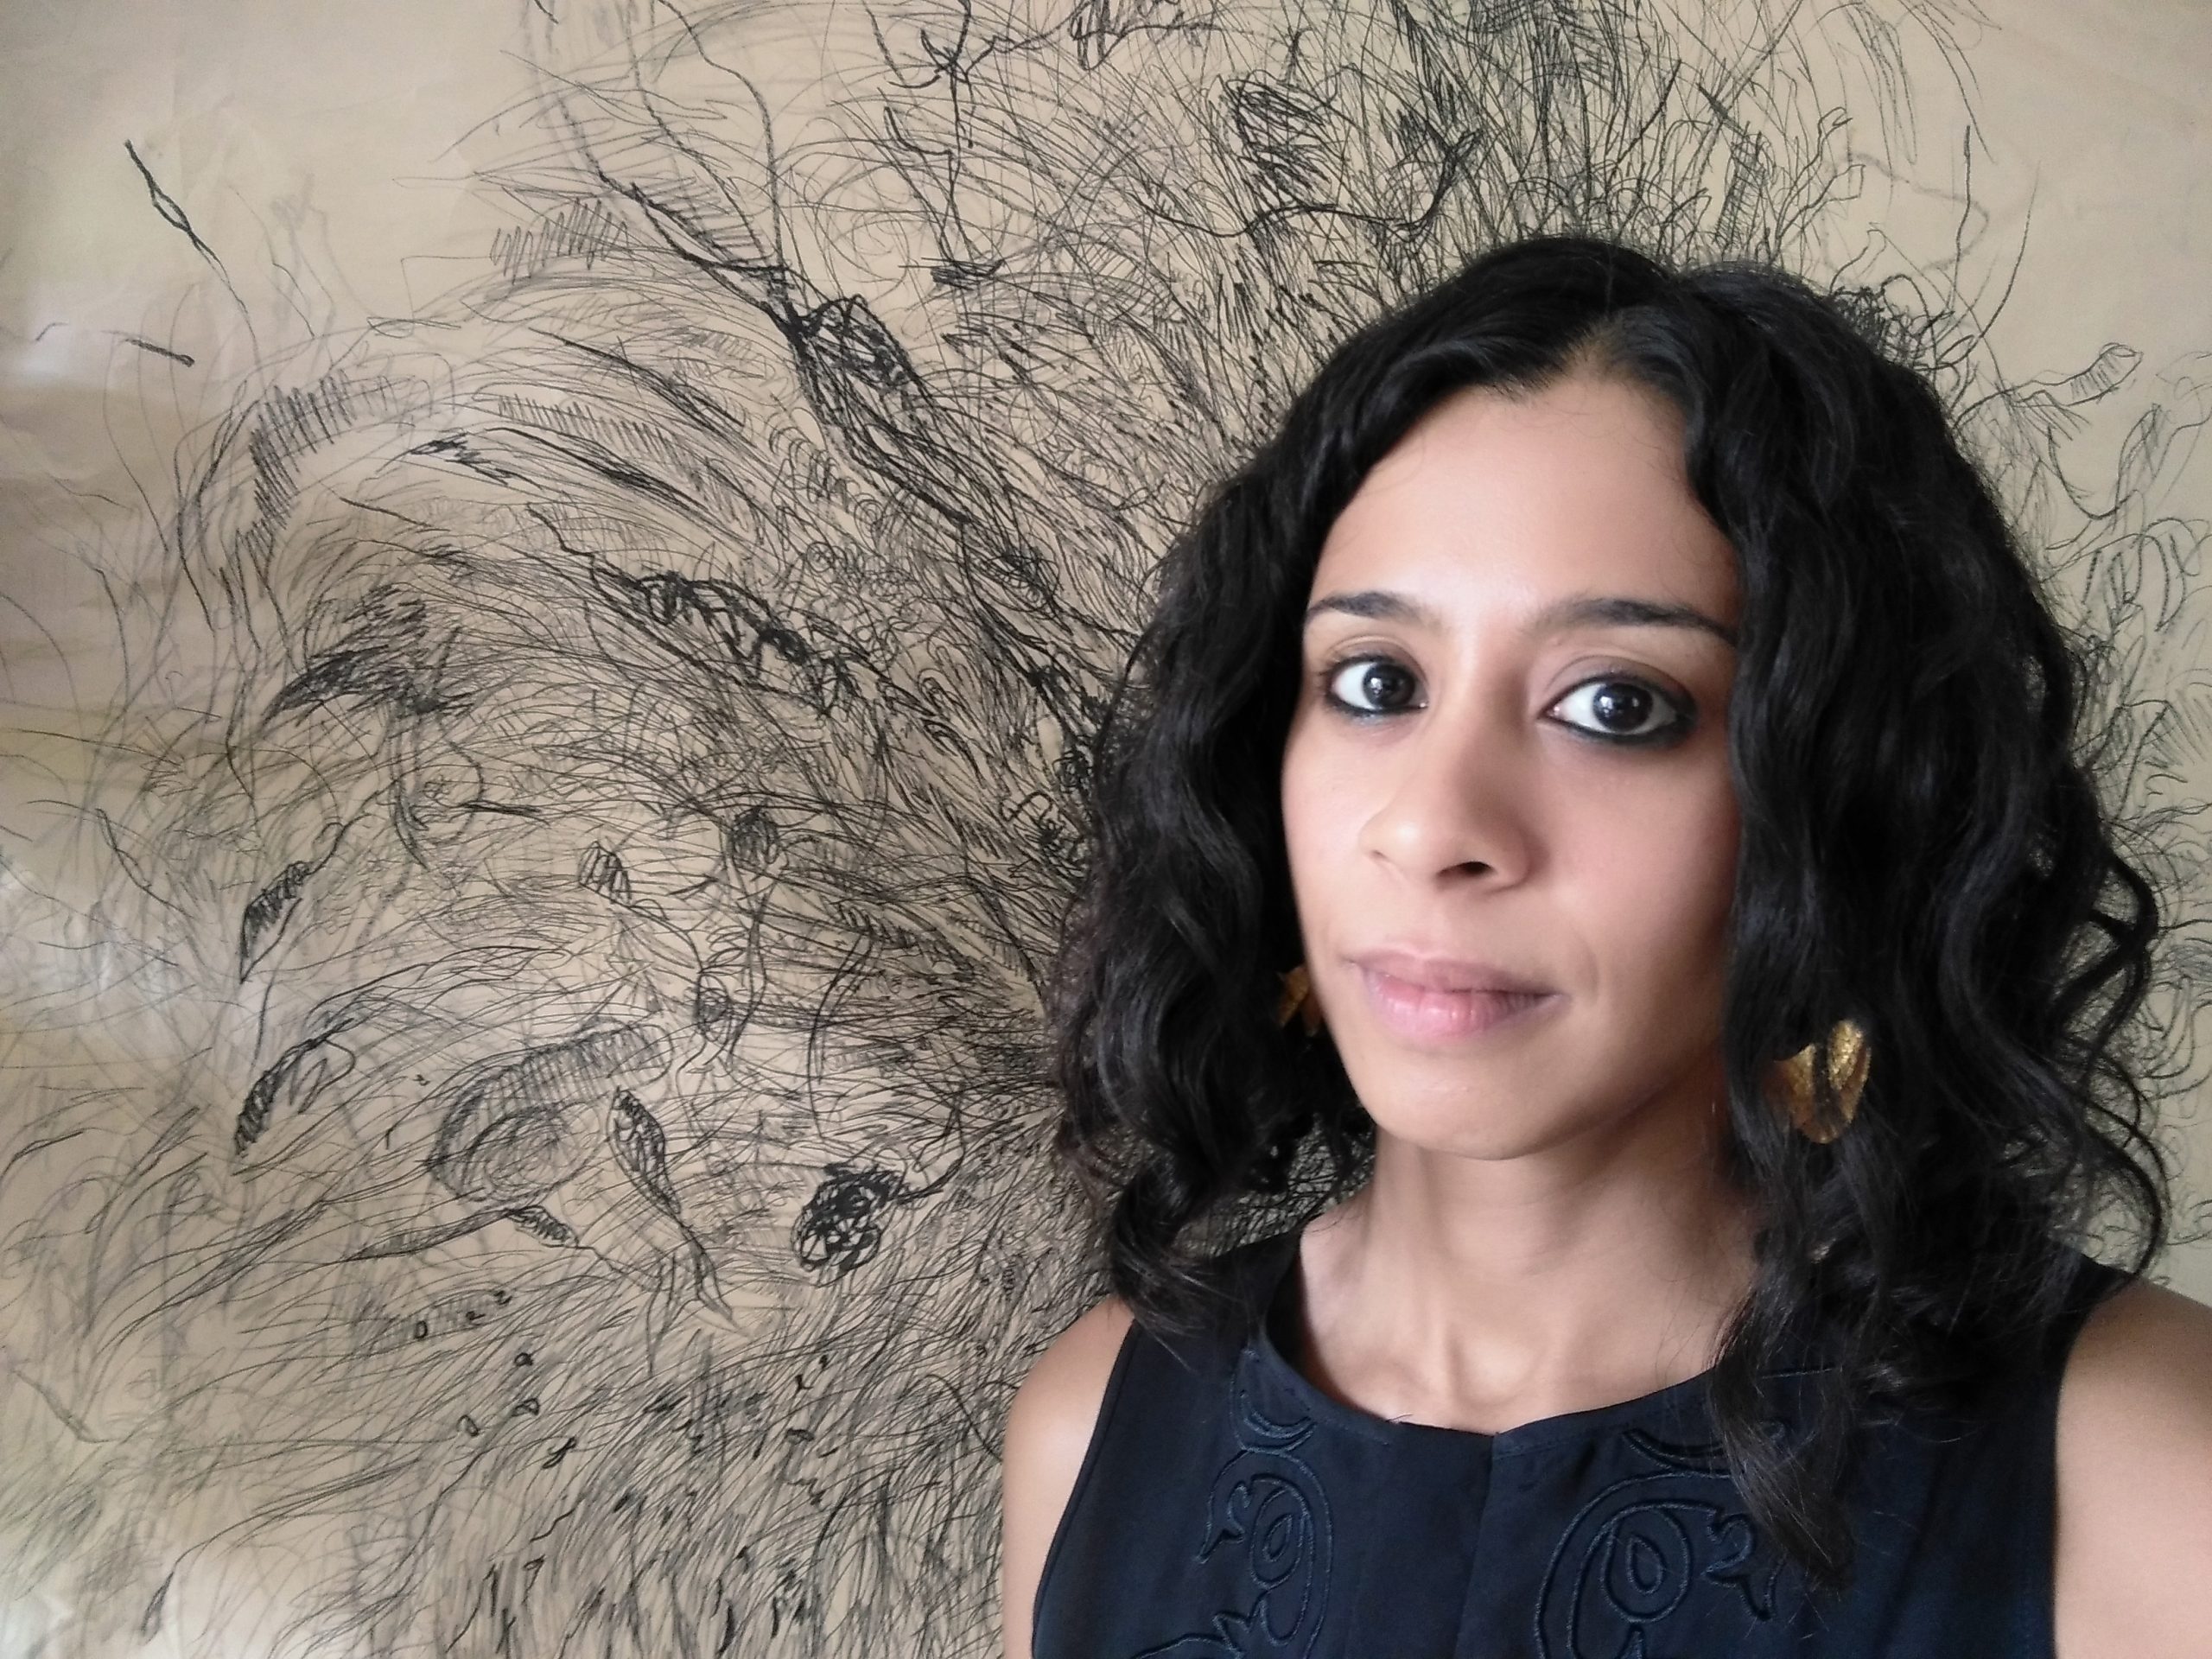 Rohini Devasher, amateur astronomer and Artist in Residence at the Open Data Institute,